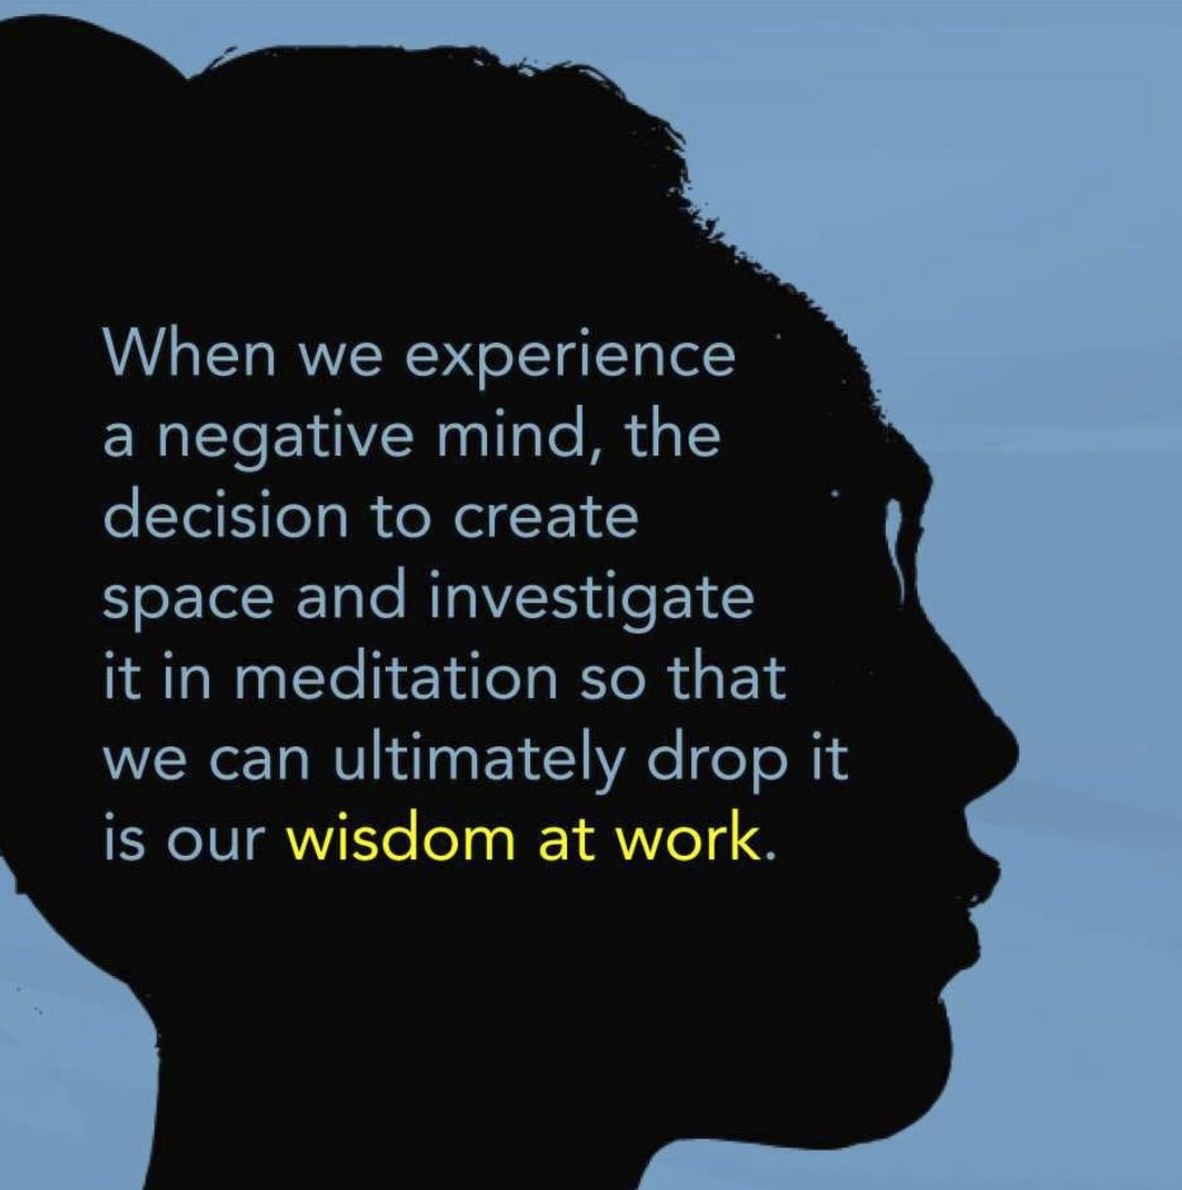 When we experience a negative mind, the decision to create space and investigate it in meditation so that we can ultimately drop it, is our wisdom at work.
